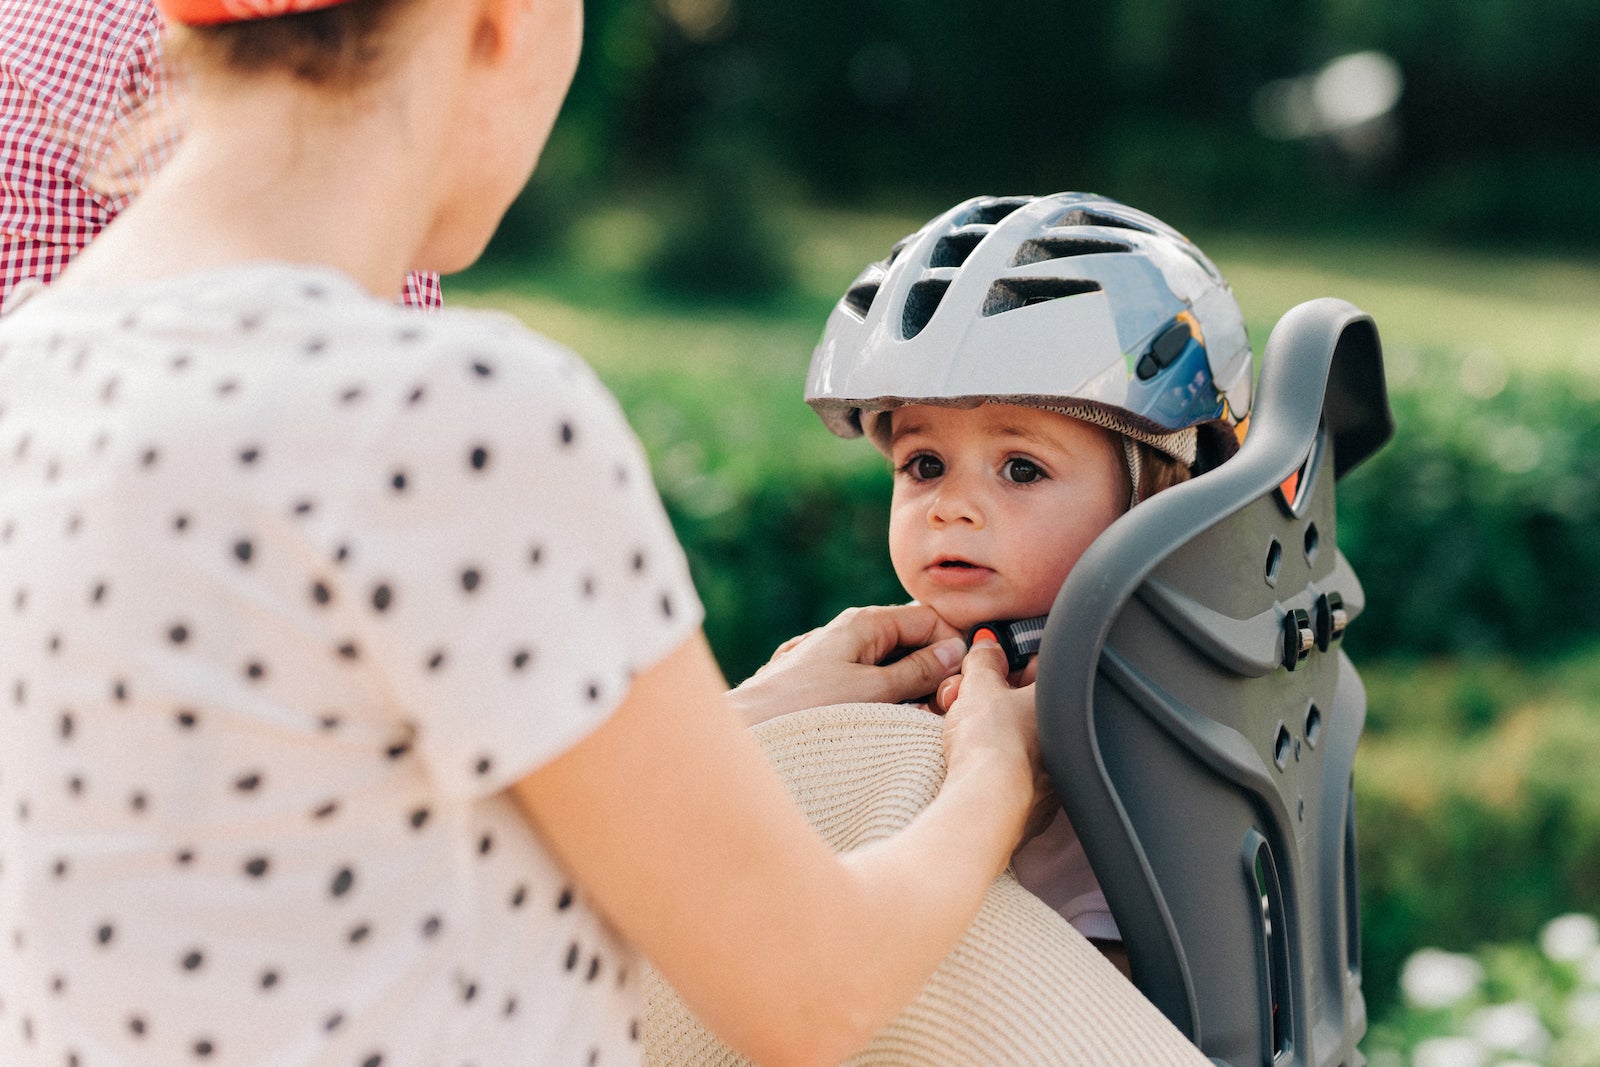 a parent puts a helmet on a child who is sitting in a child's seat attached to the parent's bicycle